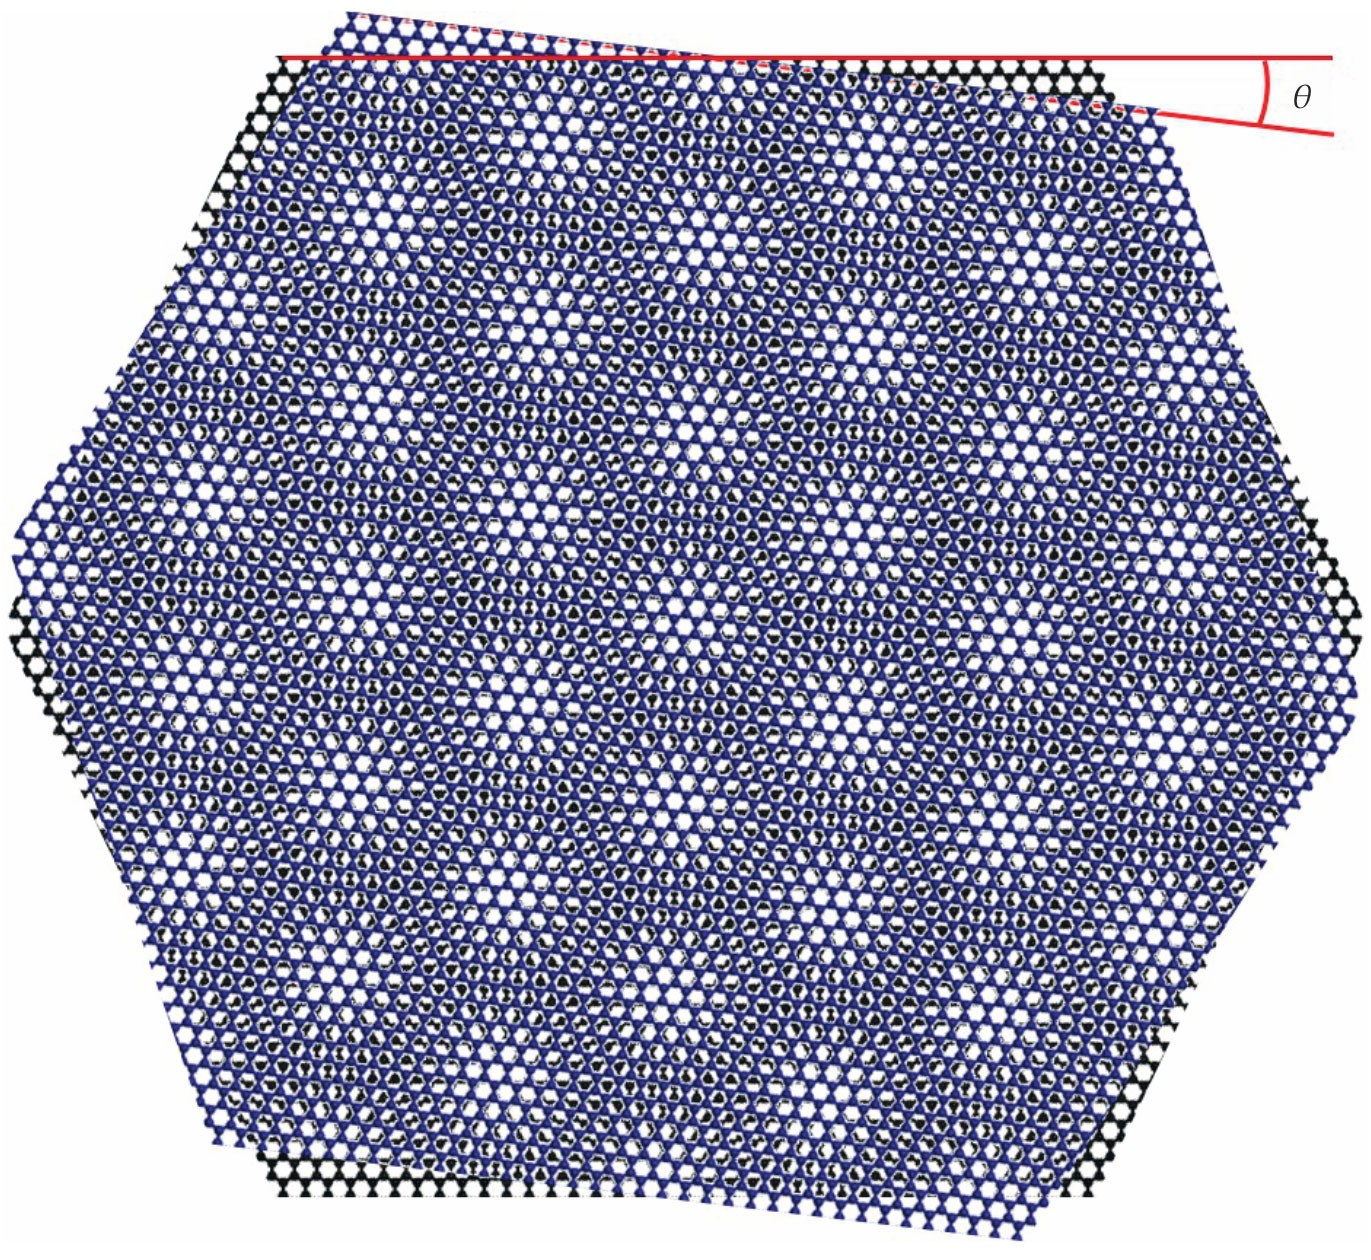 [Translate to English:] Twisted bilayer graphene, assembled from two layers of graphene with a relative twist.